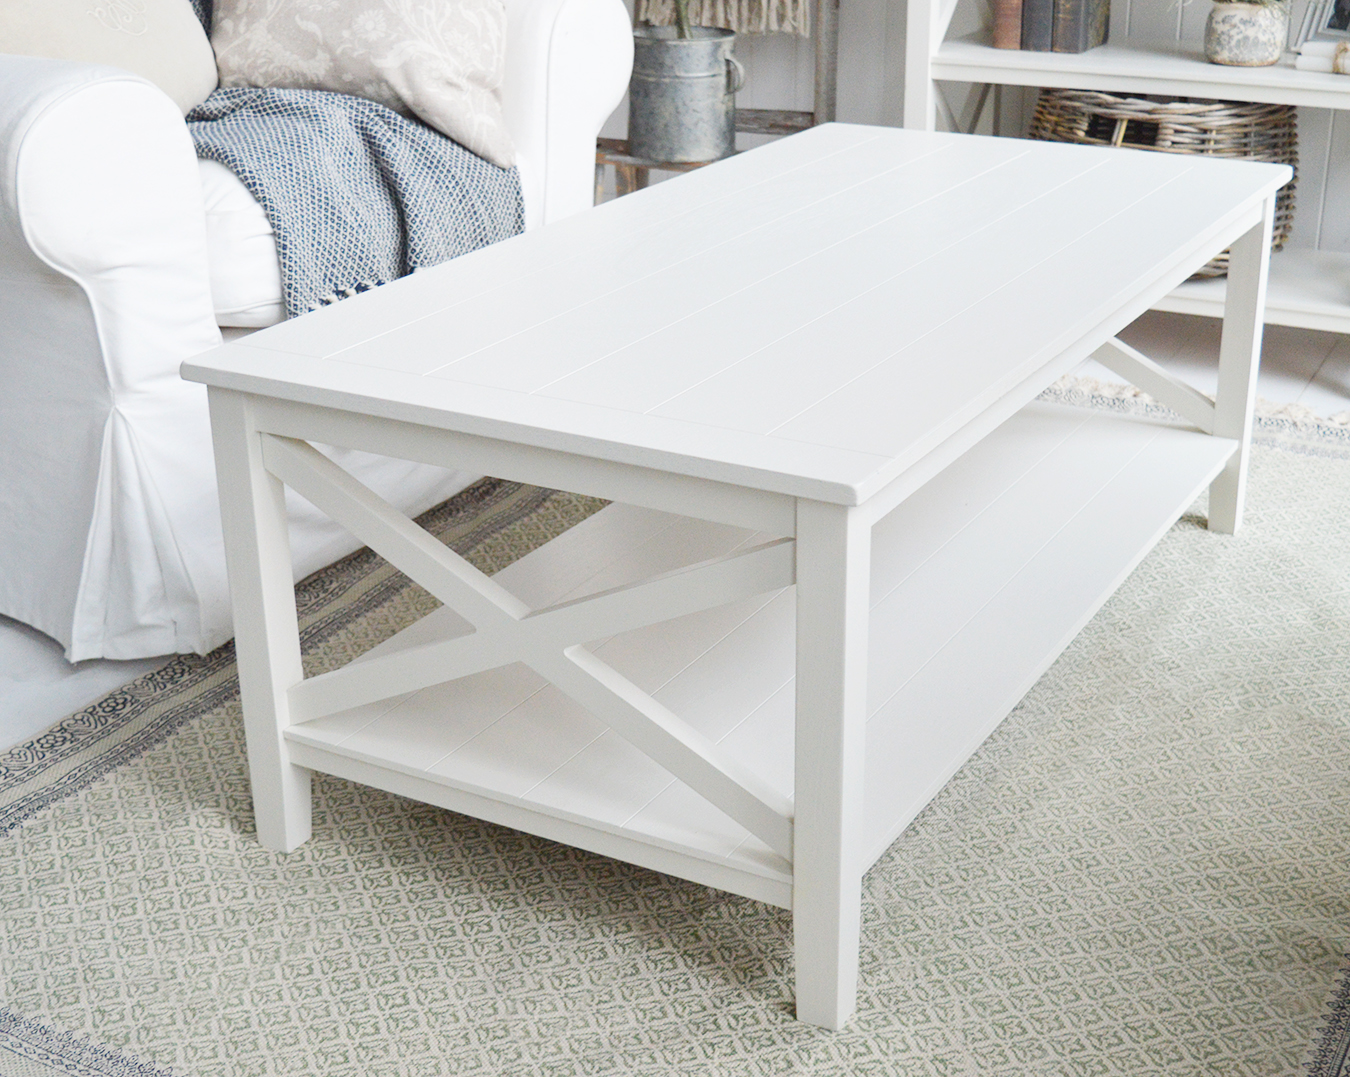 Cambridge ivory coffee table. New England furniture, coastal, modern country and farmhouse, for living room furniture and design